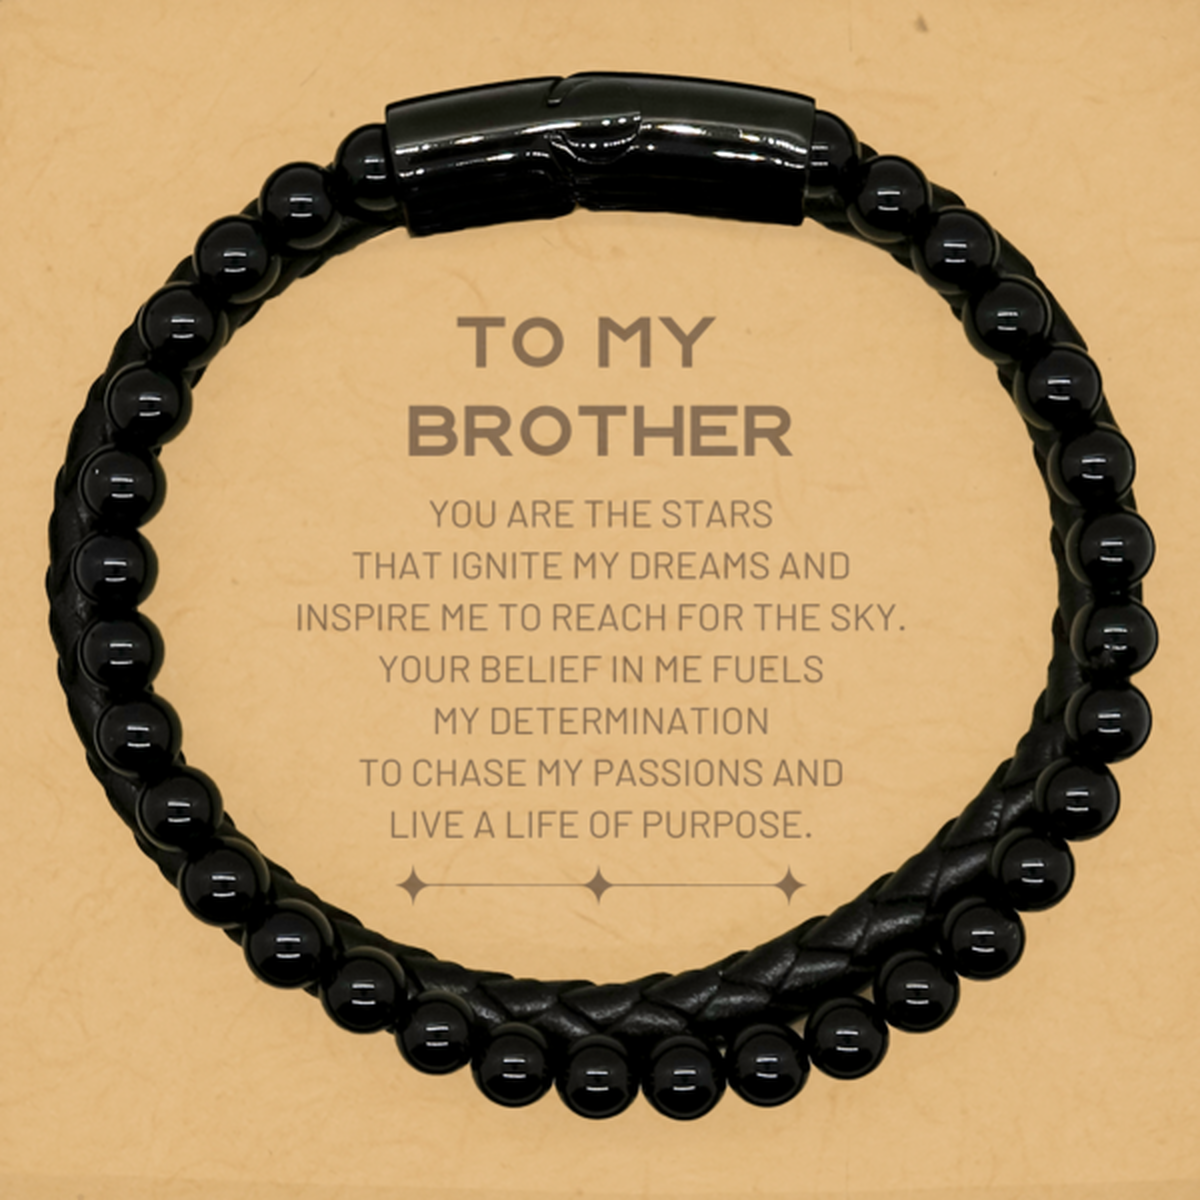 To My Brother Stone Leather Bracelets, You are the stars that ignite my dreams and inspire me to reach for the sky, Birthday Unique Gifts For Brother, Thank You Gifts For Brother